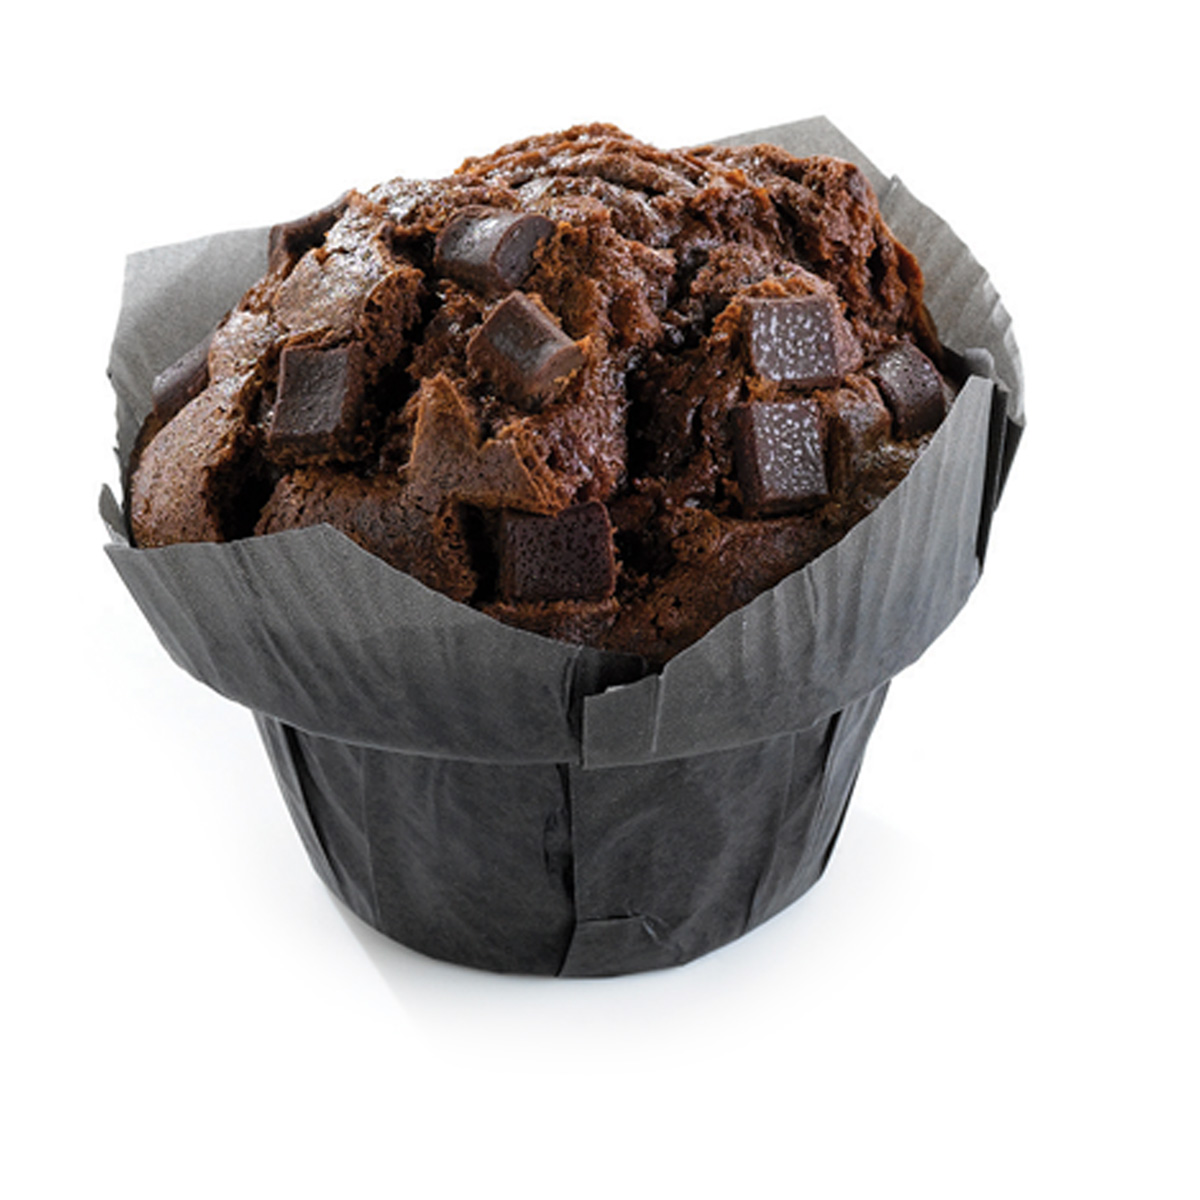 Baker & Baker Muffin double chocolate